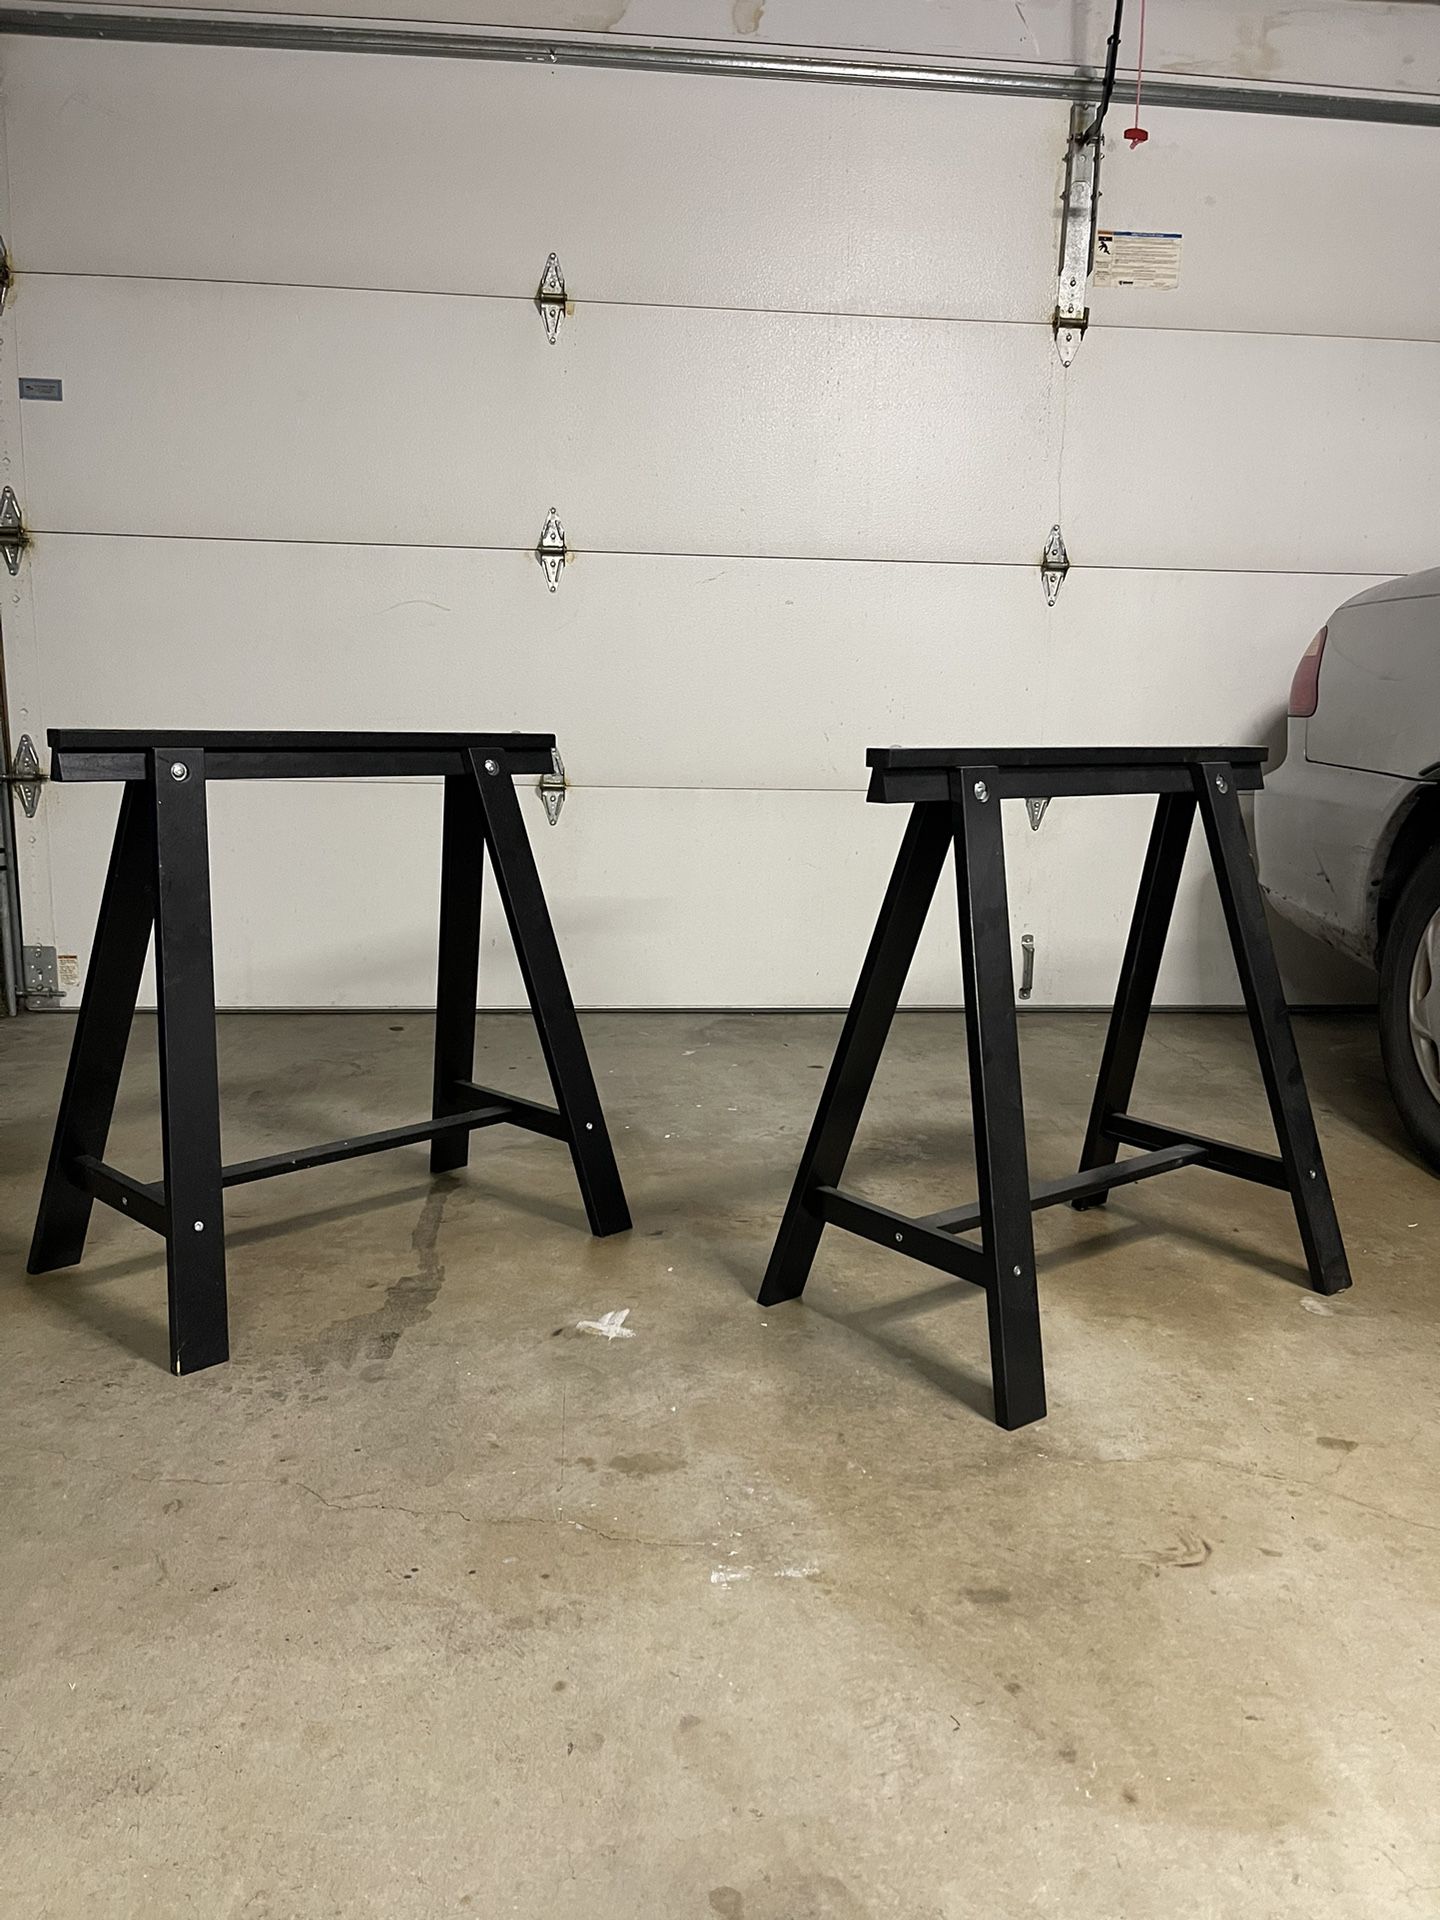 Legs For Table Or Surface